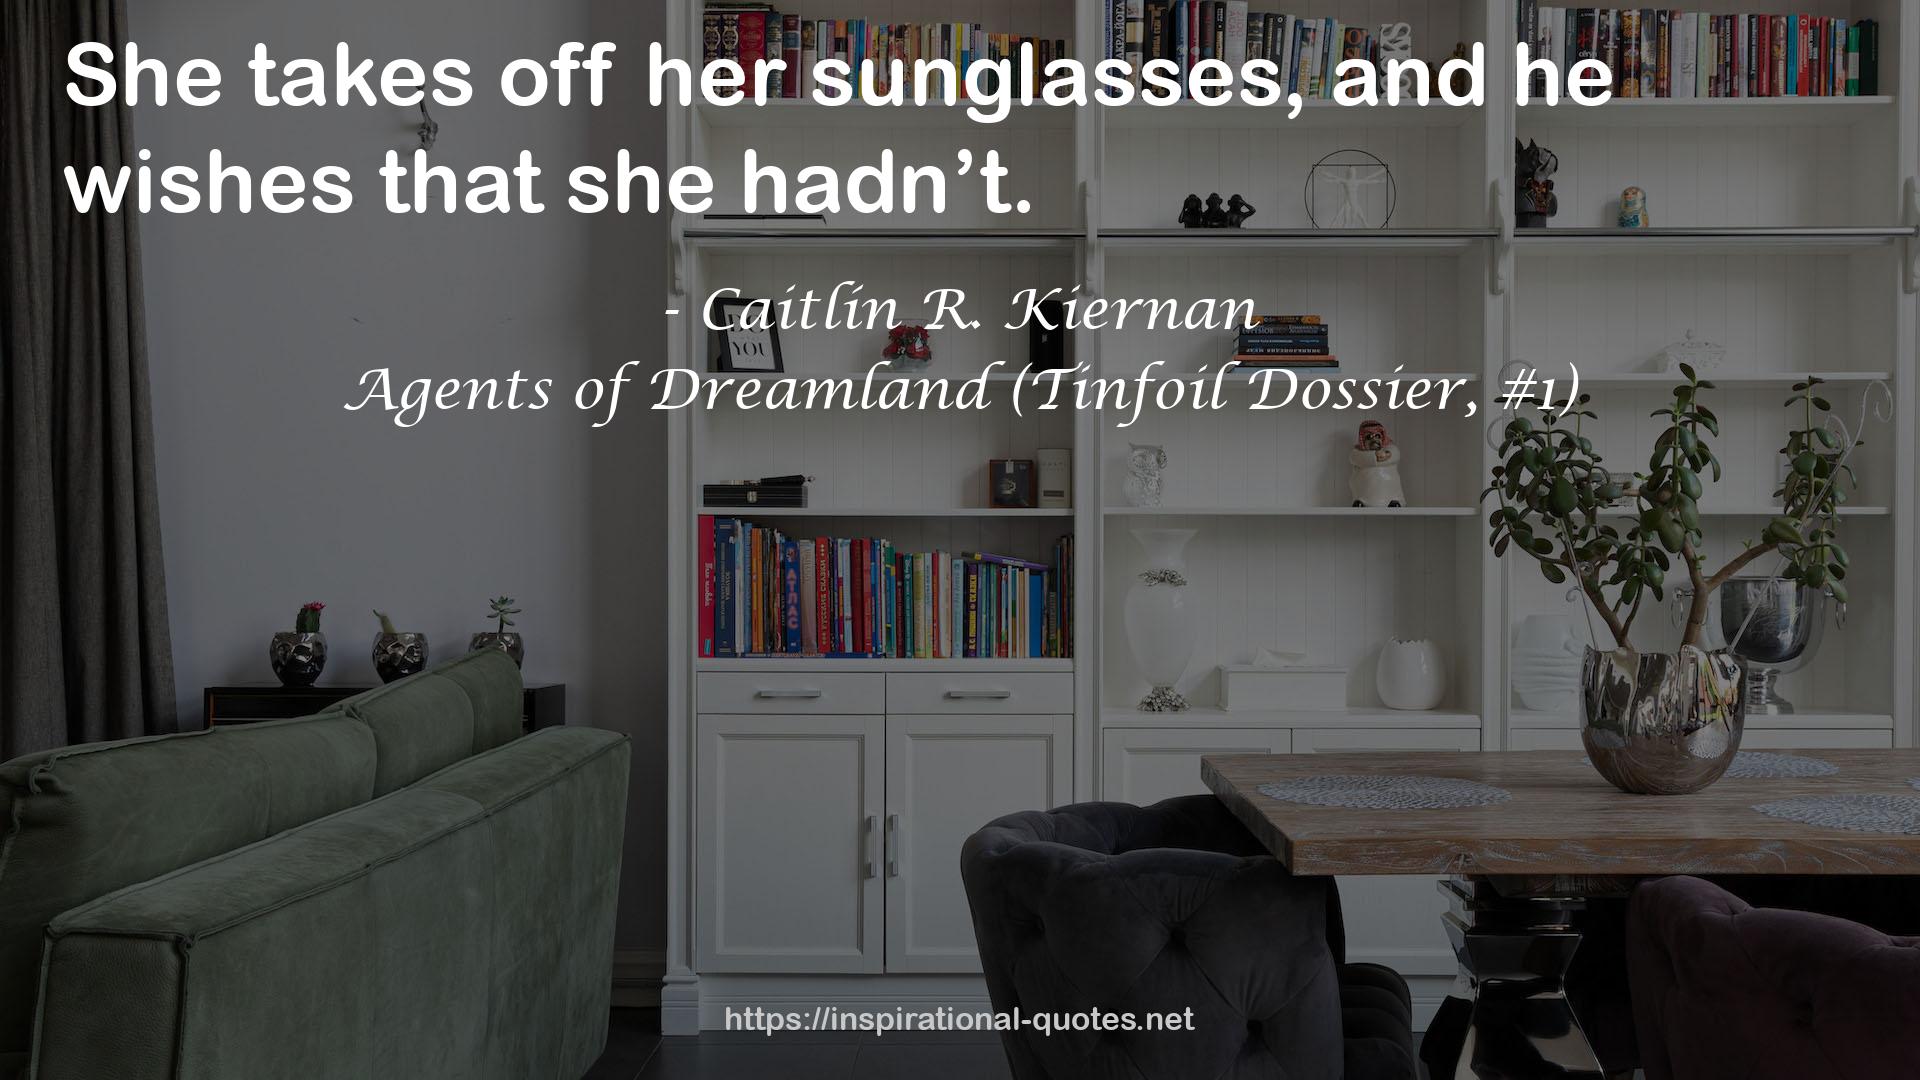 Agents of Dreamland (Tinfoil Dossier, #1) QUOTES